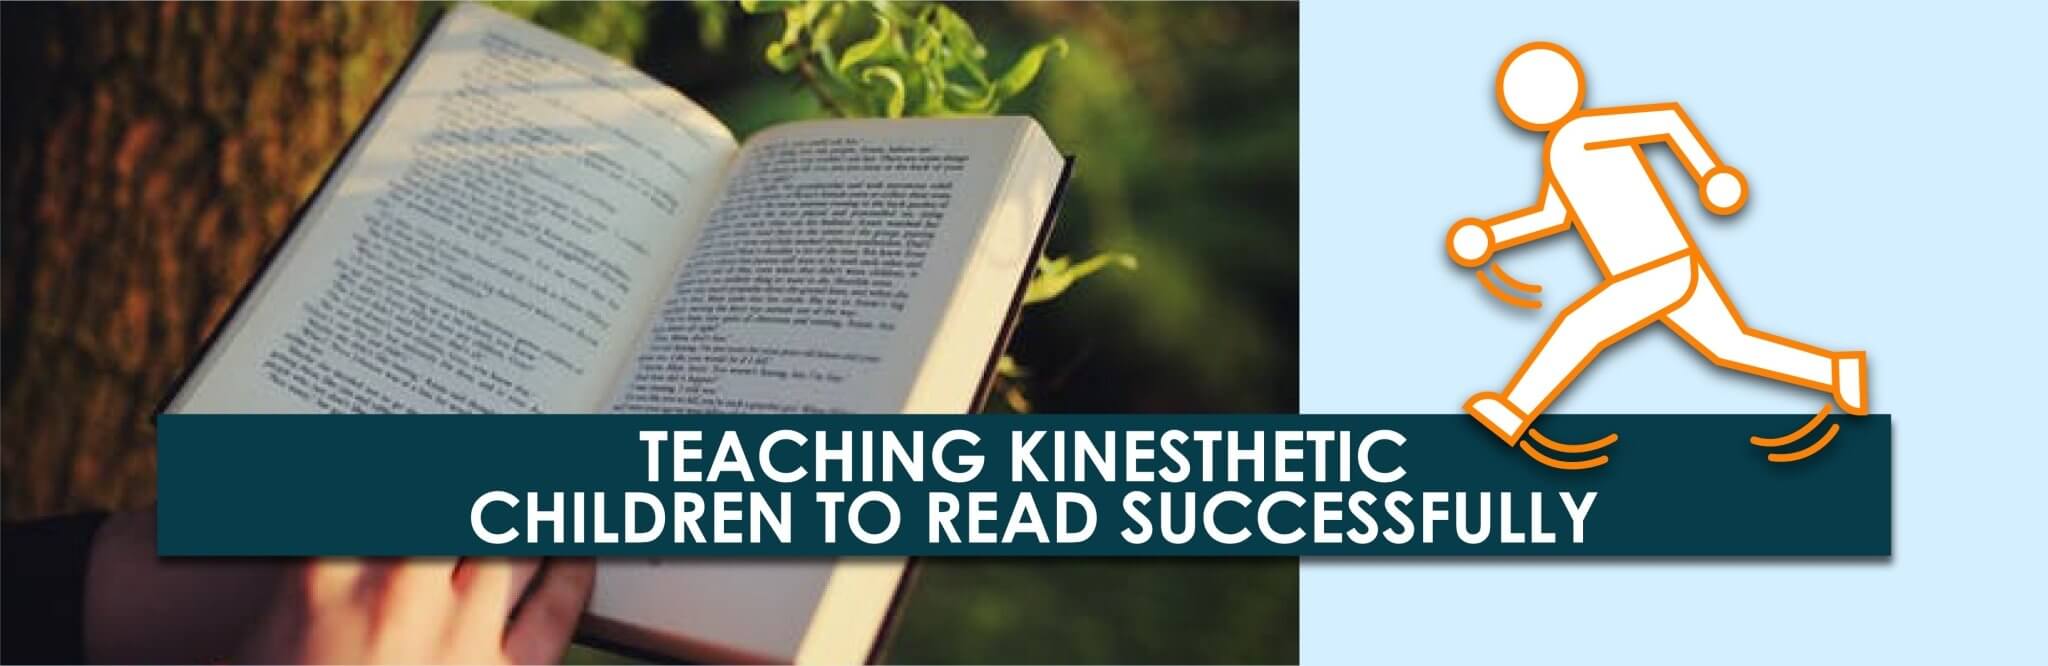 How to Teach Kinesthetic Children to Read Successfully